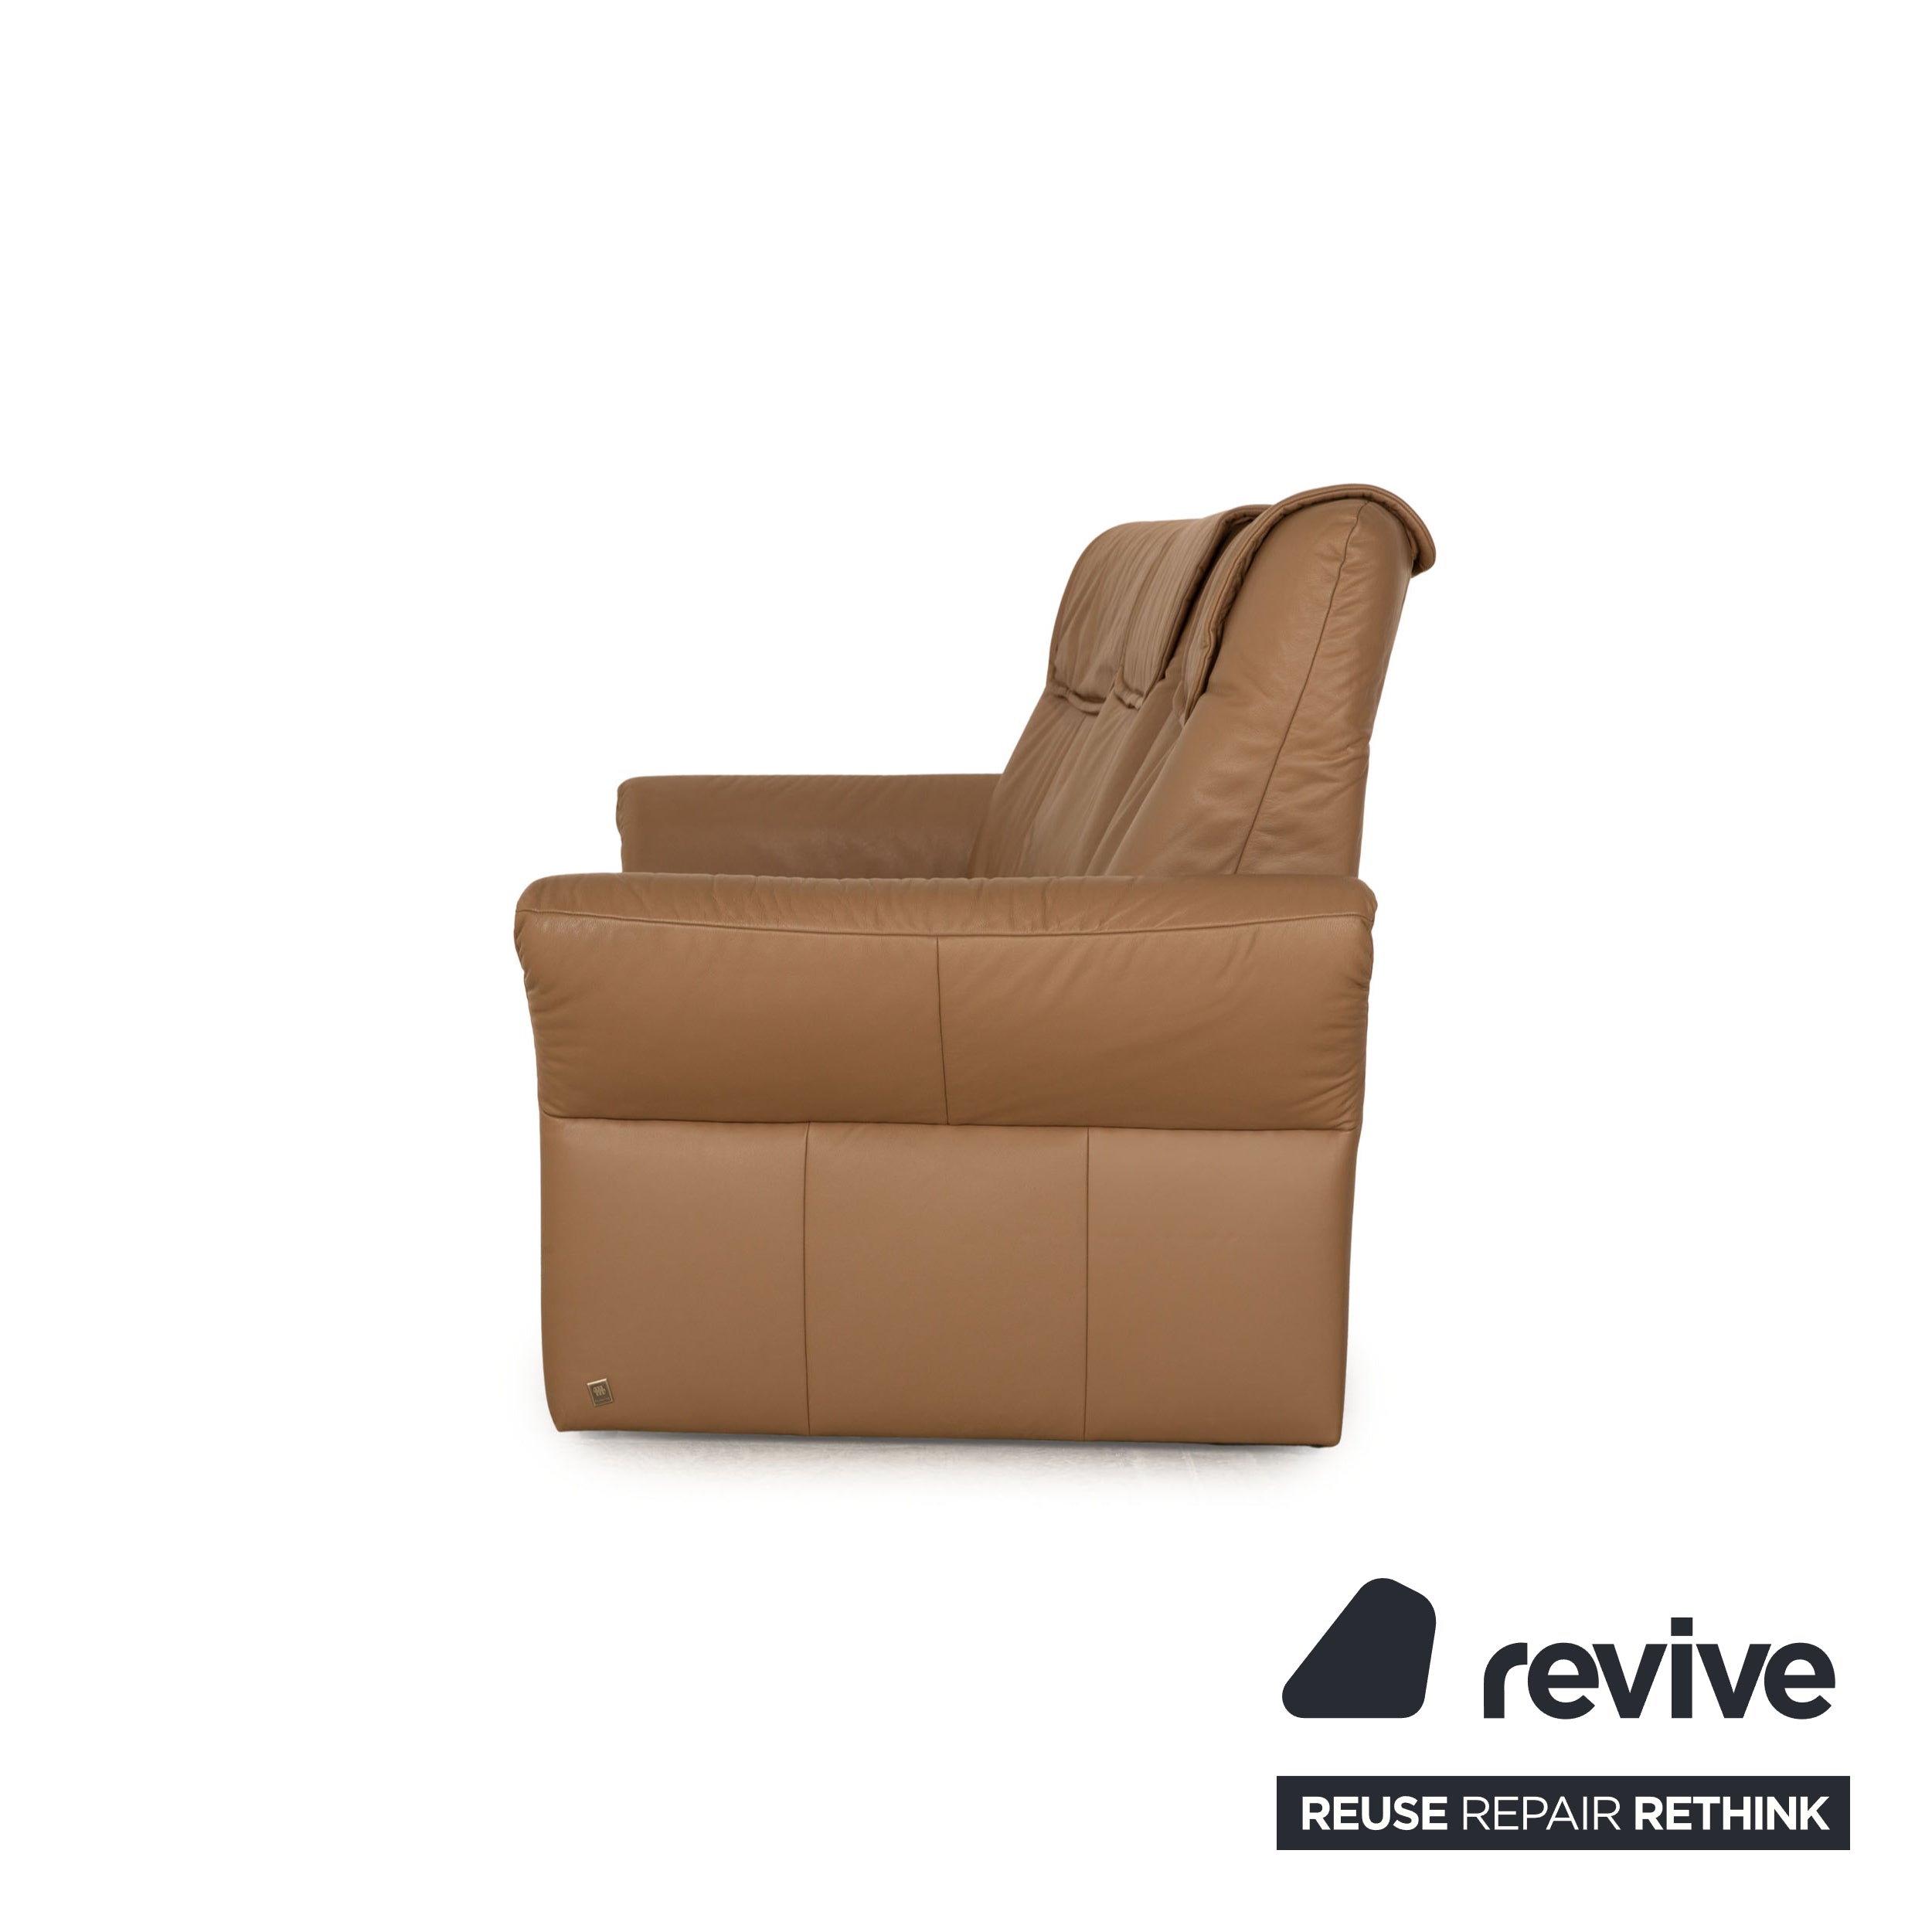 Sample ring MR 380 leather three-seater brown beige electric function sofa couch cinema sofa